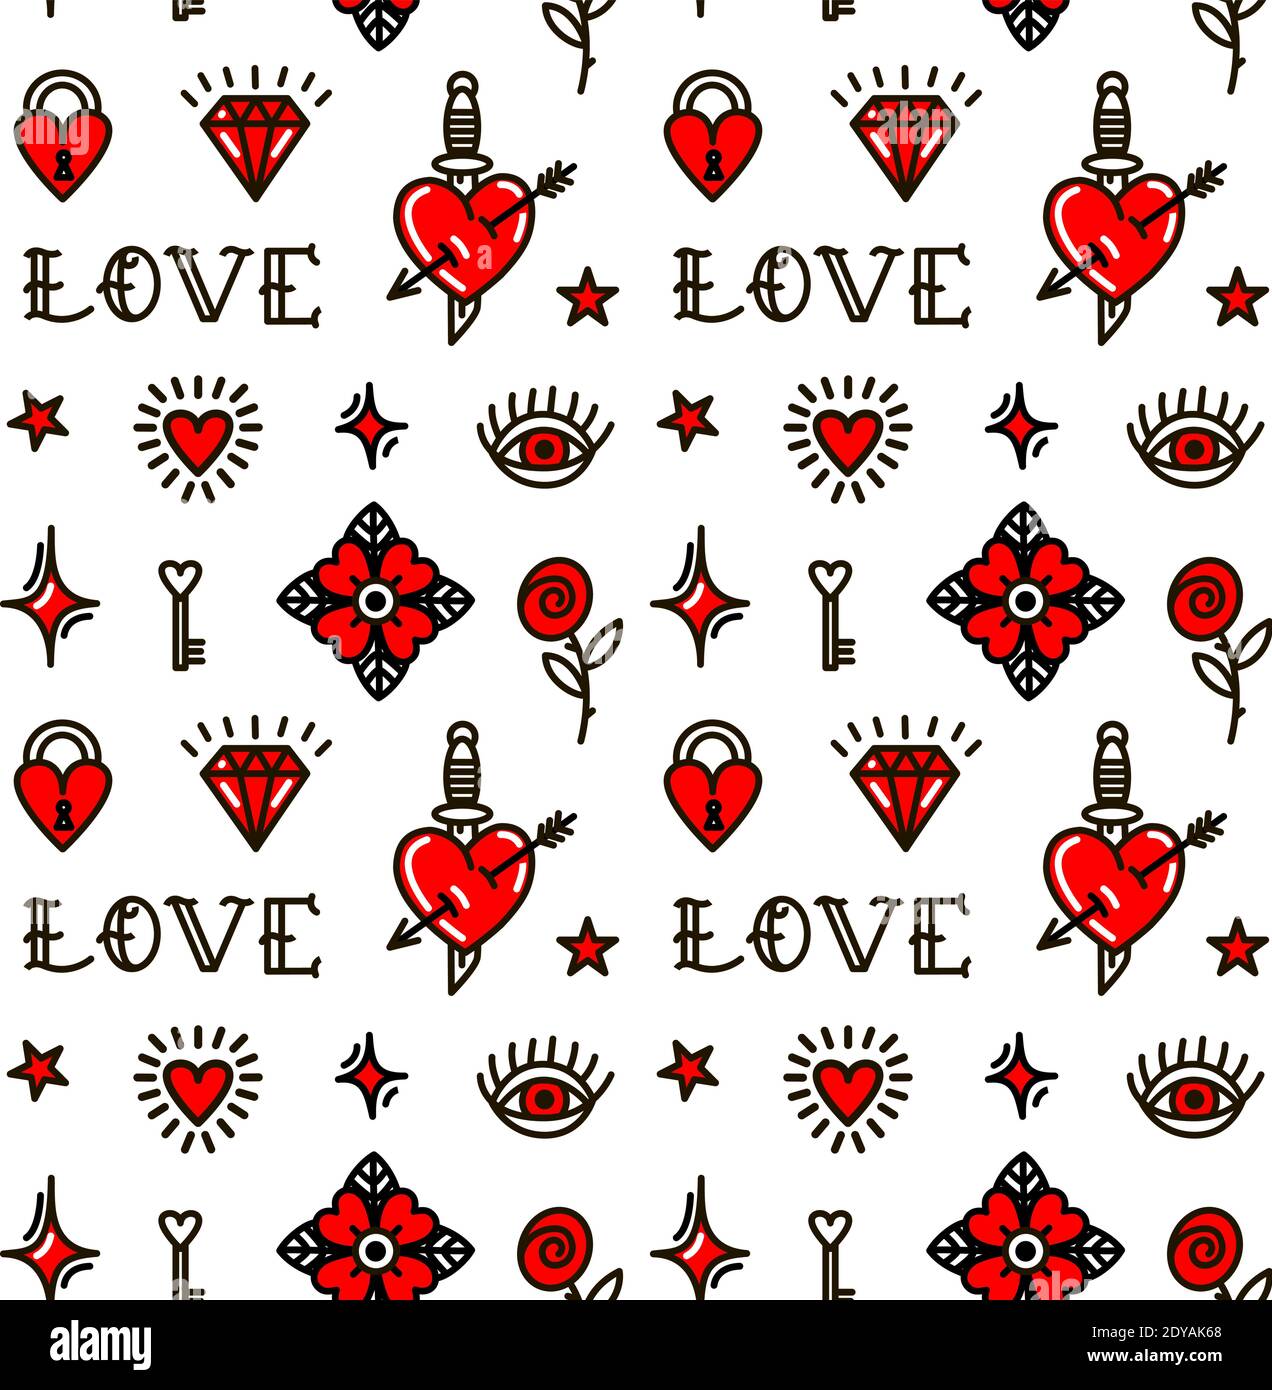 Valentines Day Tattoo Designs Flying Swallows Stock Vector Royalty Free  1623380341  Shutterstock